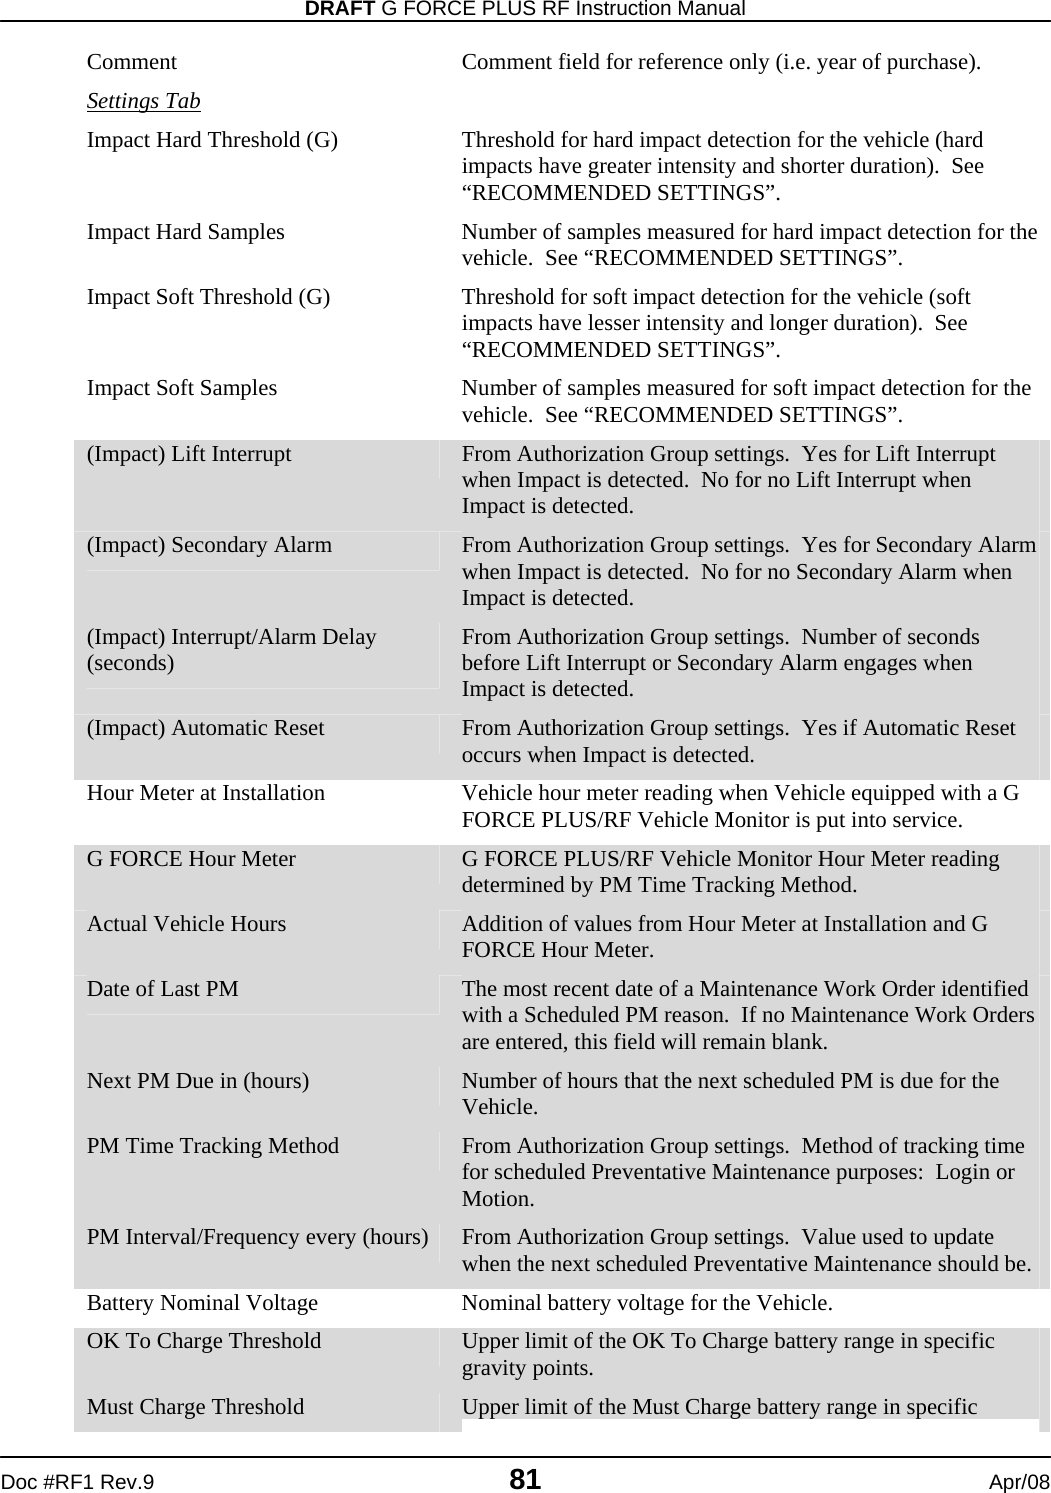 DRAFT G FORCE PLUS RF Instruction Manual   Doc #RF1 Rev.9  81  Apr/08 Comment  Comment field for reference only (i.e. year of purchase). Settings Tab  Impact Hard Threshold (G)  Threshold for hard impact detection for the vehicle (hard impacts have greater intensity and shorter duration).  See “RECOMMENDED SETTINGS”. Impact Hard Samples  Number of samples measured for hard impact detection for the vehicle.  See “RECOMMENDED SETTINGS”. Impact Soft Threshold (G)  Threshold for soft impact detection for the vehicle (soft impacts have lesser intensity and longer duration).  See “RECOMMENDED SETTINGS”. Impact Soft Samples  Number of samples measured for soft impact detection for the vehicle.  See “RECOMMENDED SETTINGS”. (Impact) Lift Interrupt  From Authorization Group settings.  Yes for Lift Interrupt when Impact is detected.  No for no Lift Interrupt when Impact is detected. (Impact) Secondary Alarm  From Authorization Group settings.  Yes for Secondary Alarm when Impact is detected.  No for no Secondary Alarm when Impact is detected. (Impact) Interrupt/Alarm Delay (seconds)  From Authorization Group settings.  Number of seconds before Lift Interrupt or Secondary Alarm engages when Impact is detected. (Impact) Automatic Reset  From Authorization Group settings.  Yes if Automatic Reset occurs when Impact is detected.  Hour Meter at Installation  Vehicle hour meter reading when Vehicle equipped with a G FORCE PLUS/RF Vehicle Monitor is put into service. G FORCE Hour Meter  G FORCE PLUS/RF Vehicle Monitor Hour Meter reading determined by PM Time Tracking Method. Actual Vehicle Hours  Addition of values from Hour Meter at Installation and G FORCE Hour Meter.  Date of Last PM  The most recent date of a Maintenance Work Order identified with a Scheduled PM reason.  If no Maintenance Work Orders are entered, this field will remain blank.  Next PM Due in (hours)  Number of hours that the next scheduled PM is due for the Vehicle. PM Time Tracking Method  From Authorization Group settings.  Method of tracking time for scheduled Preventative Maintenance purposes:  Login or Motion. PM Interval/Frequency every (hours)  From Authorization Group settings.  Value used to update when the next scheduled Preventative Maintenance should be. Battery Nominal Voltage  Nominal battery voltage for the Vehicle. OK To Charge Threshold  Upper limit of the OK To Charge battery range in specific gravity points. Must Charge Threshold  Upper limit of the Must Charge battery range in specific 